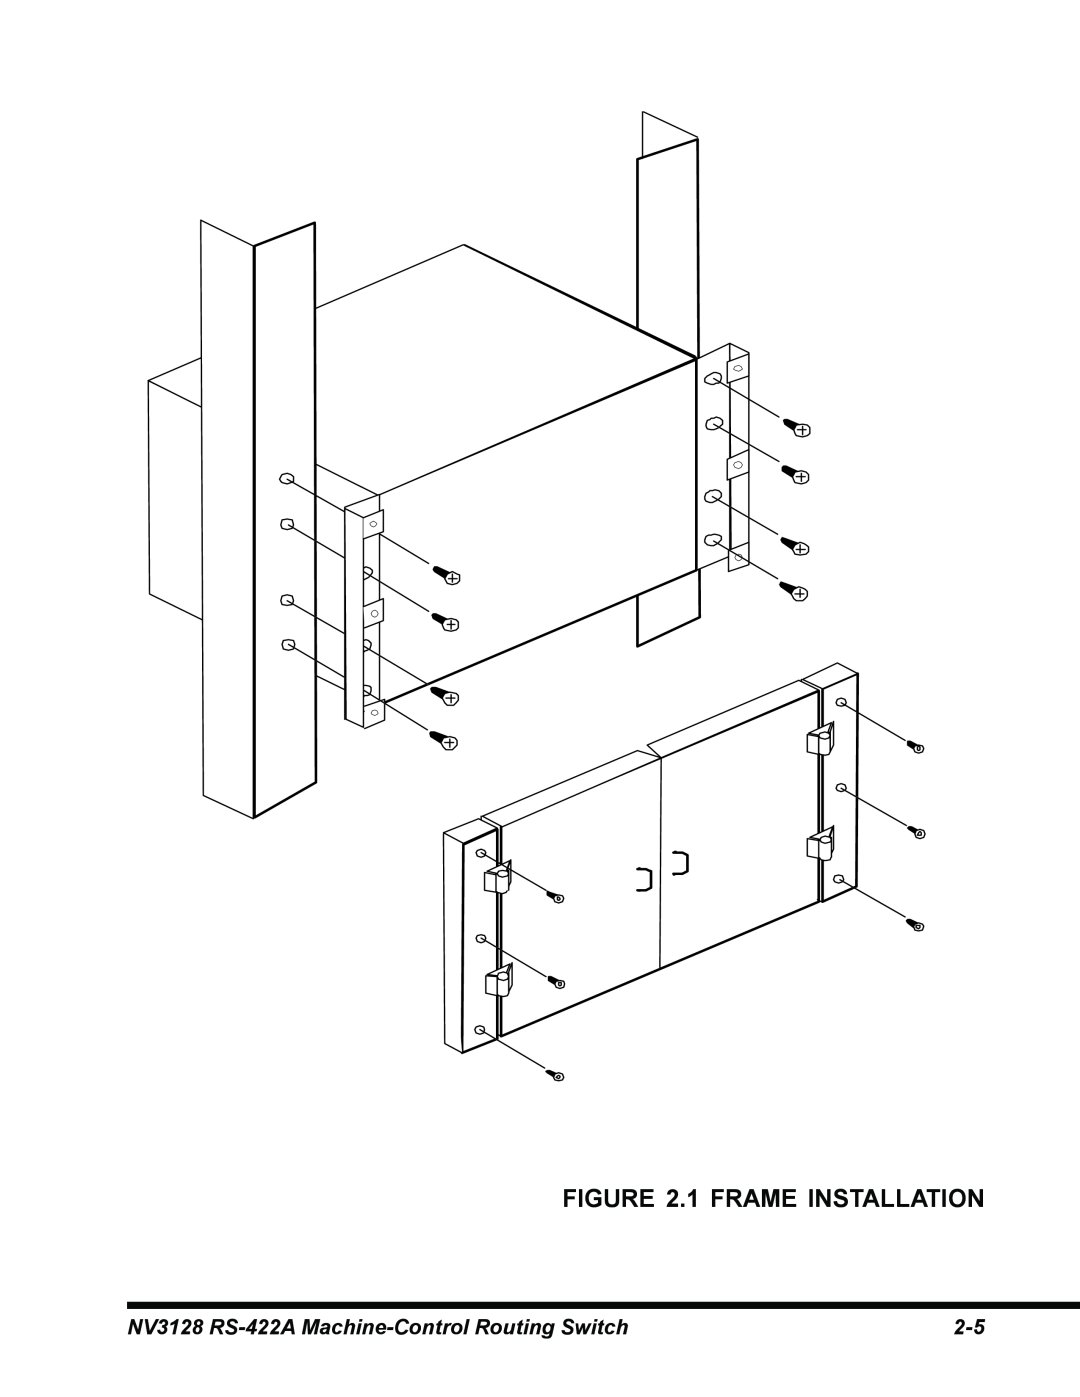 Envision Peripherals manual 1 FRAME INSTALLATION, NV3128 RS-422A Machine-Control Routing Switch 